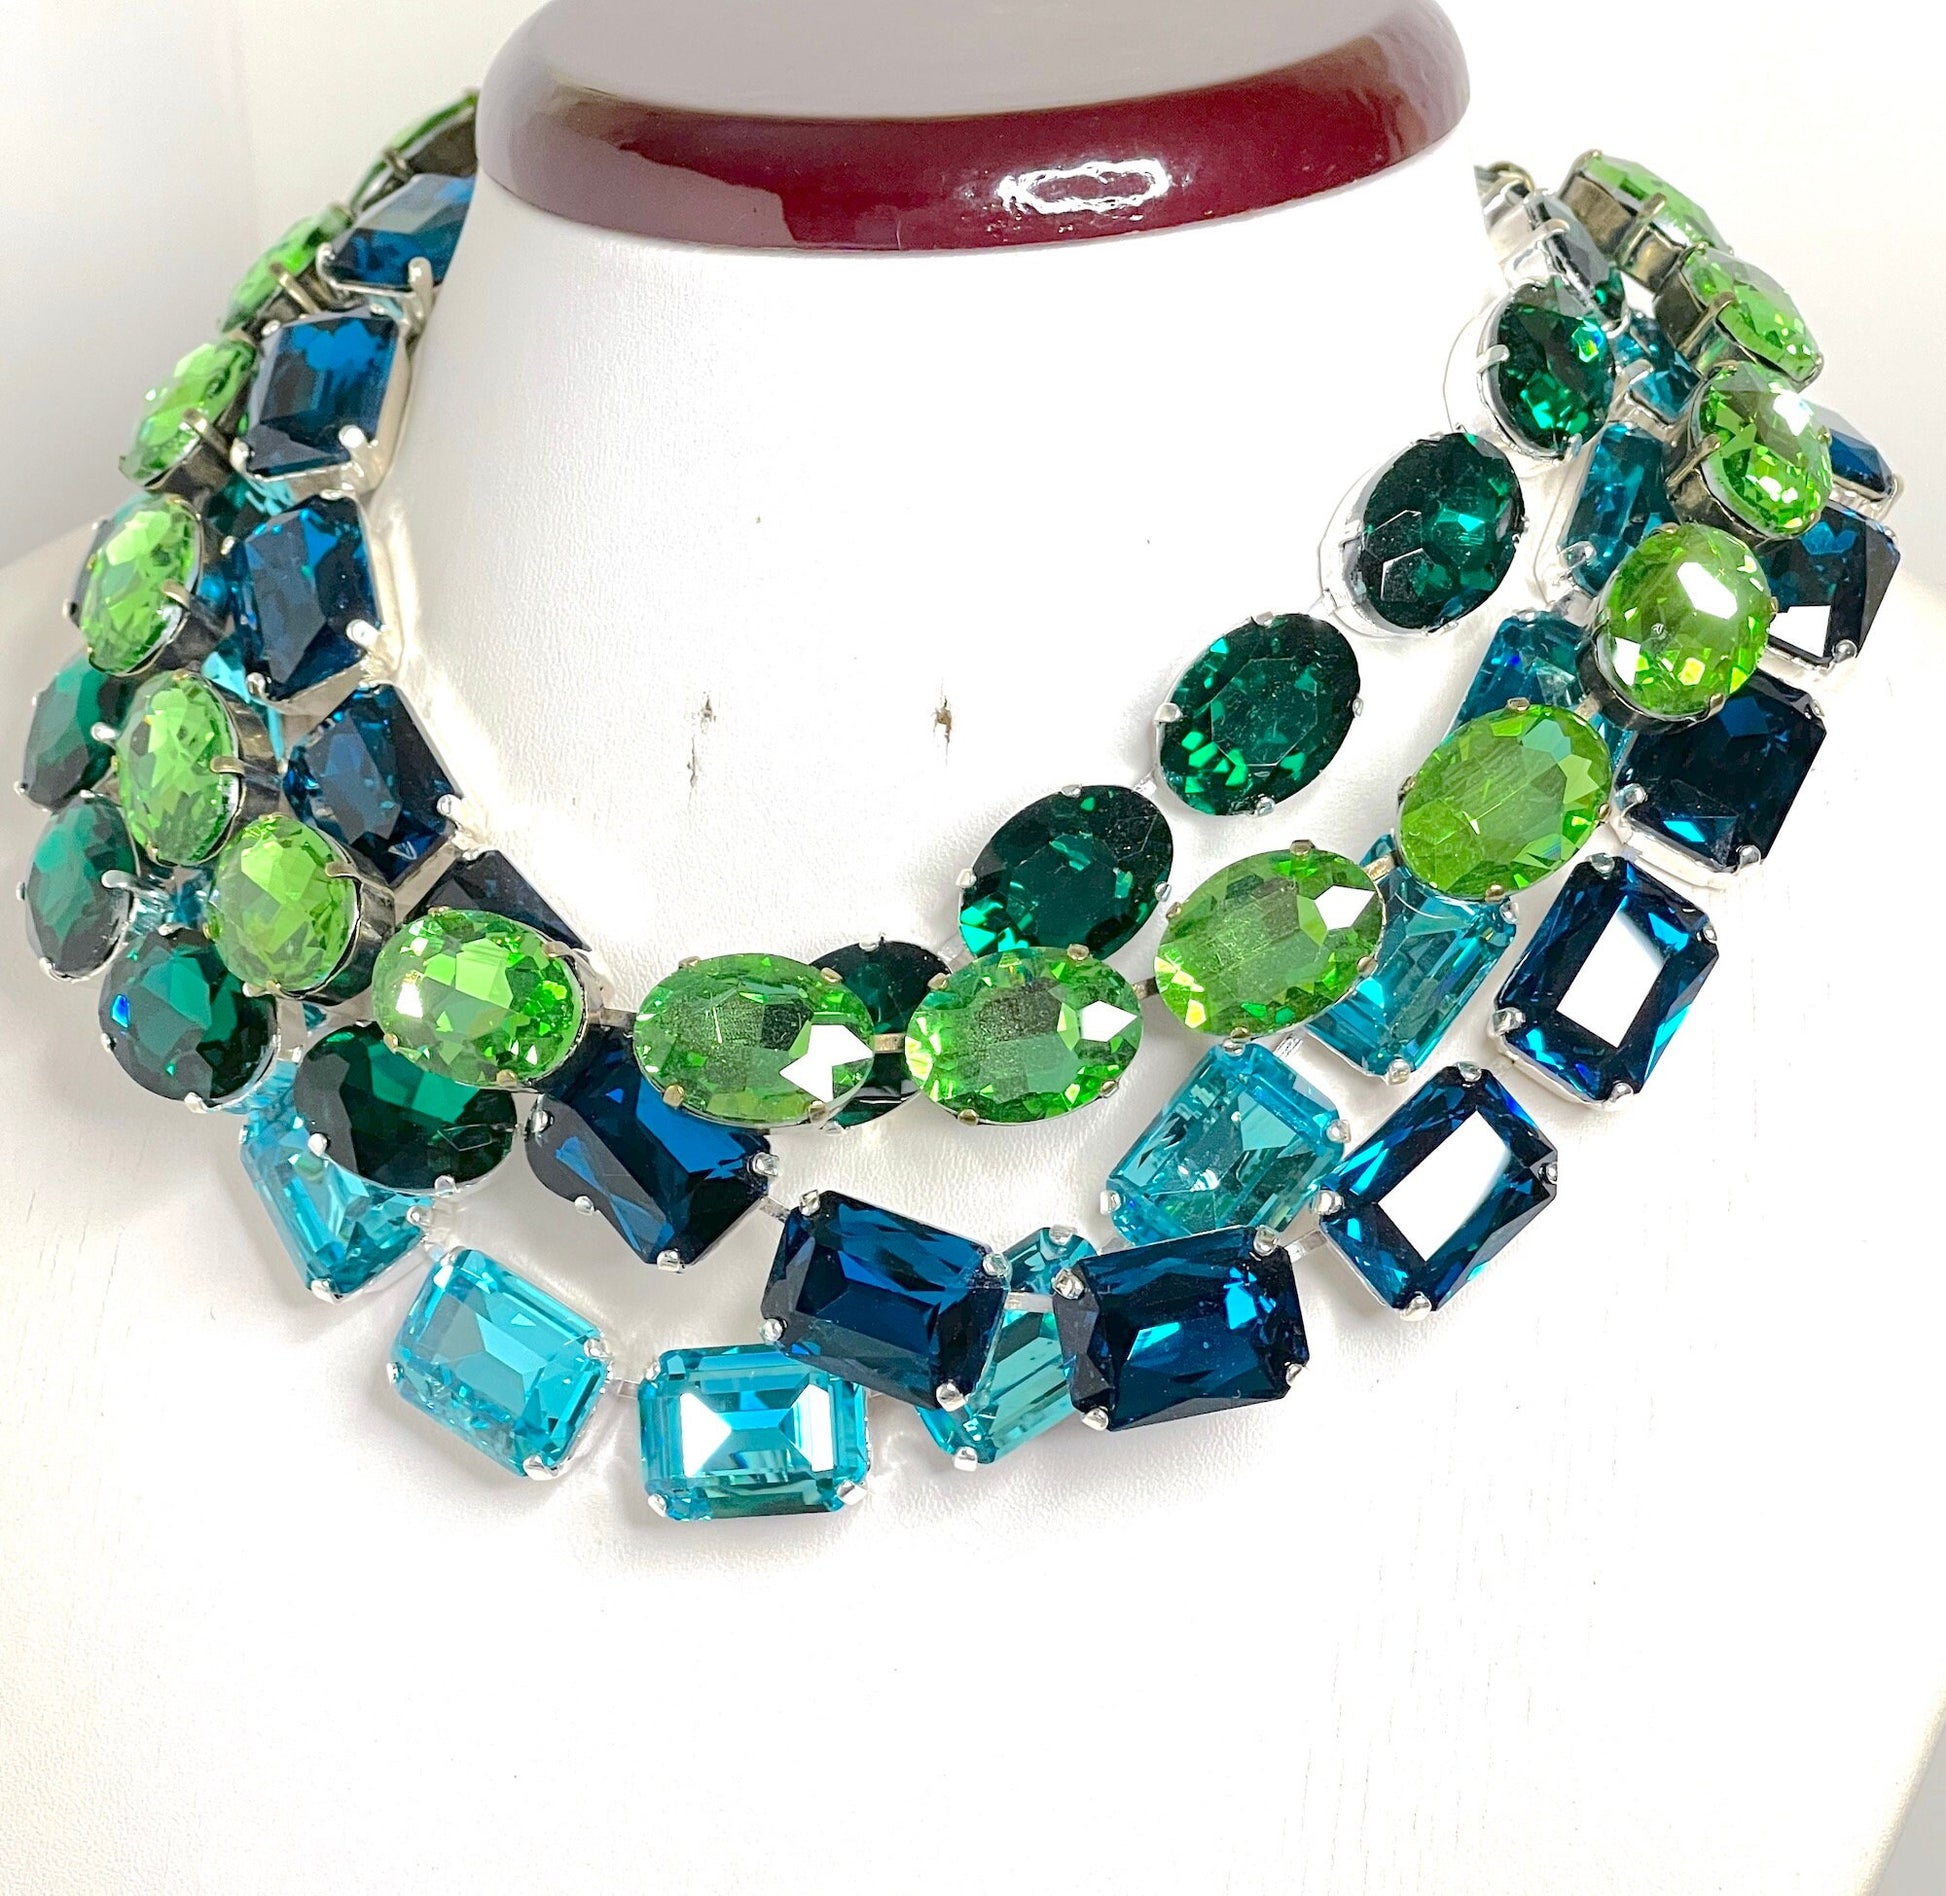 Peridot Aquamarine Georgian Collet Necklaces, Emerald Crystal Choker, Anna Wintour Style, Riviere Necklace, Necklaces for Women